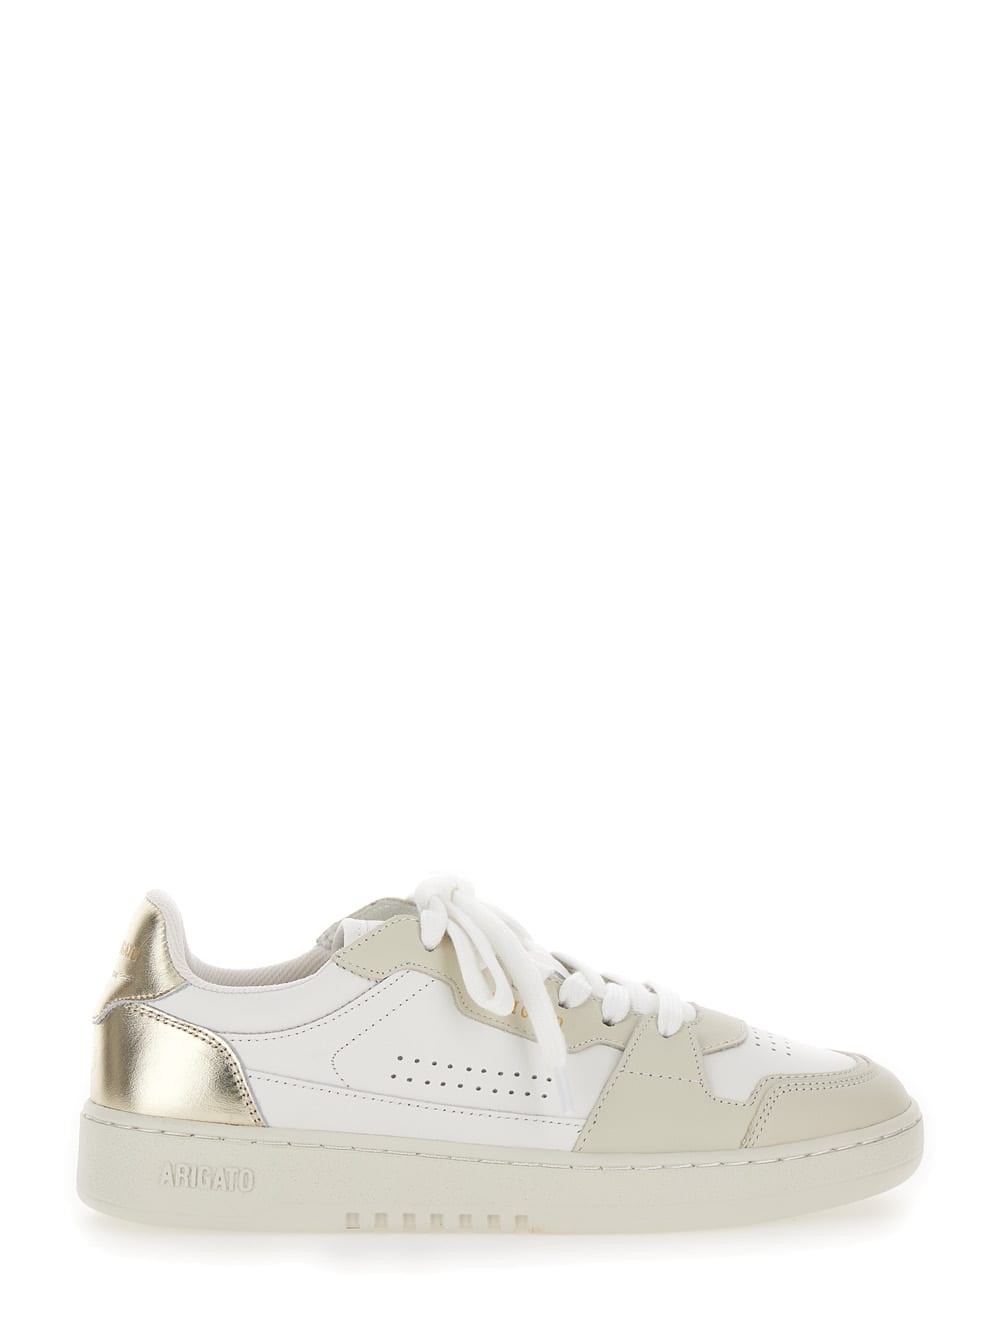 Axel Arigato Dice Lo White Sneakers With Logo Detail And Metallic Heel Tab In Suede And Leather Woman